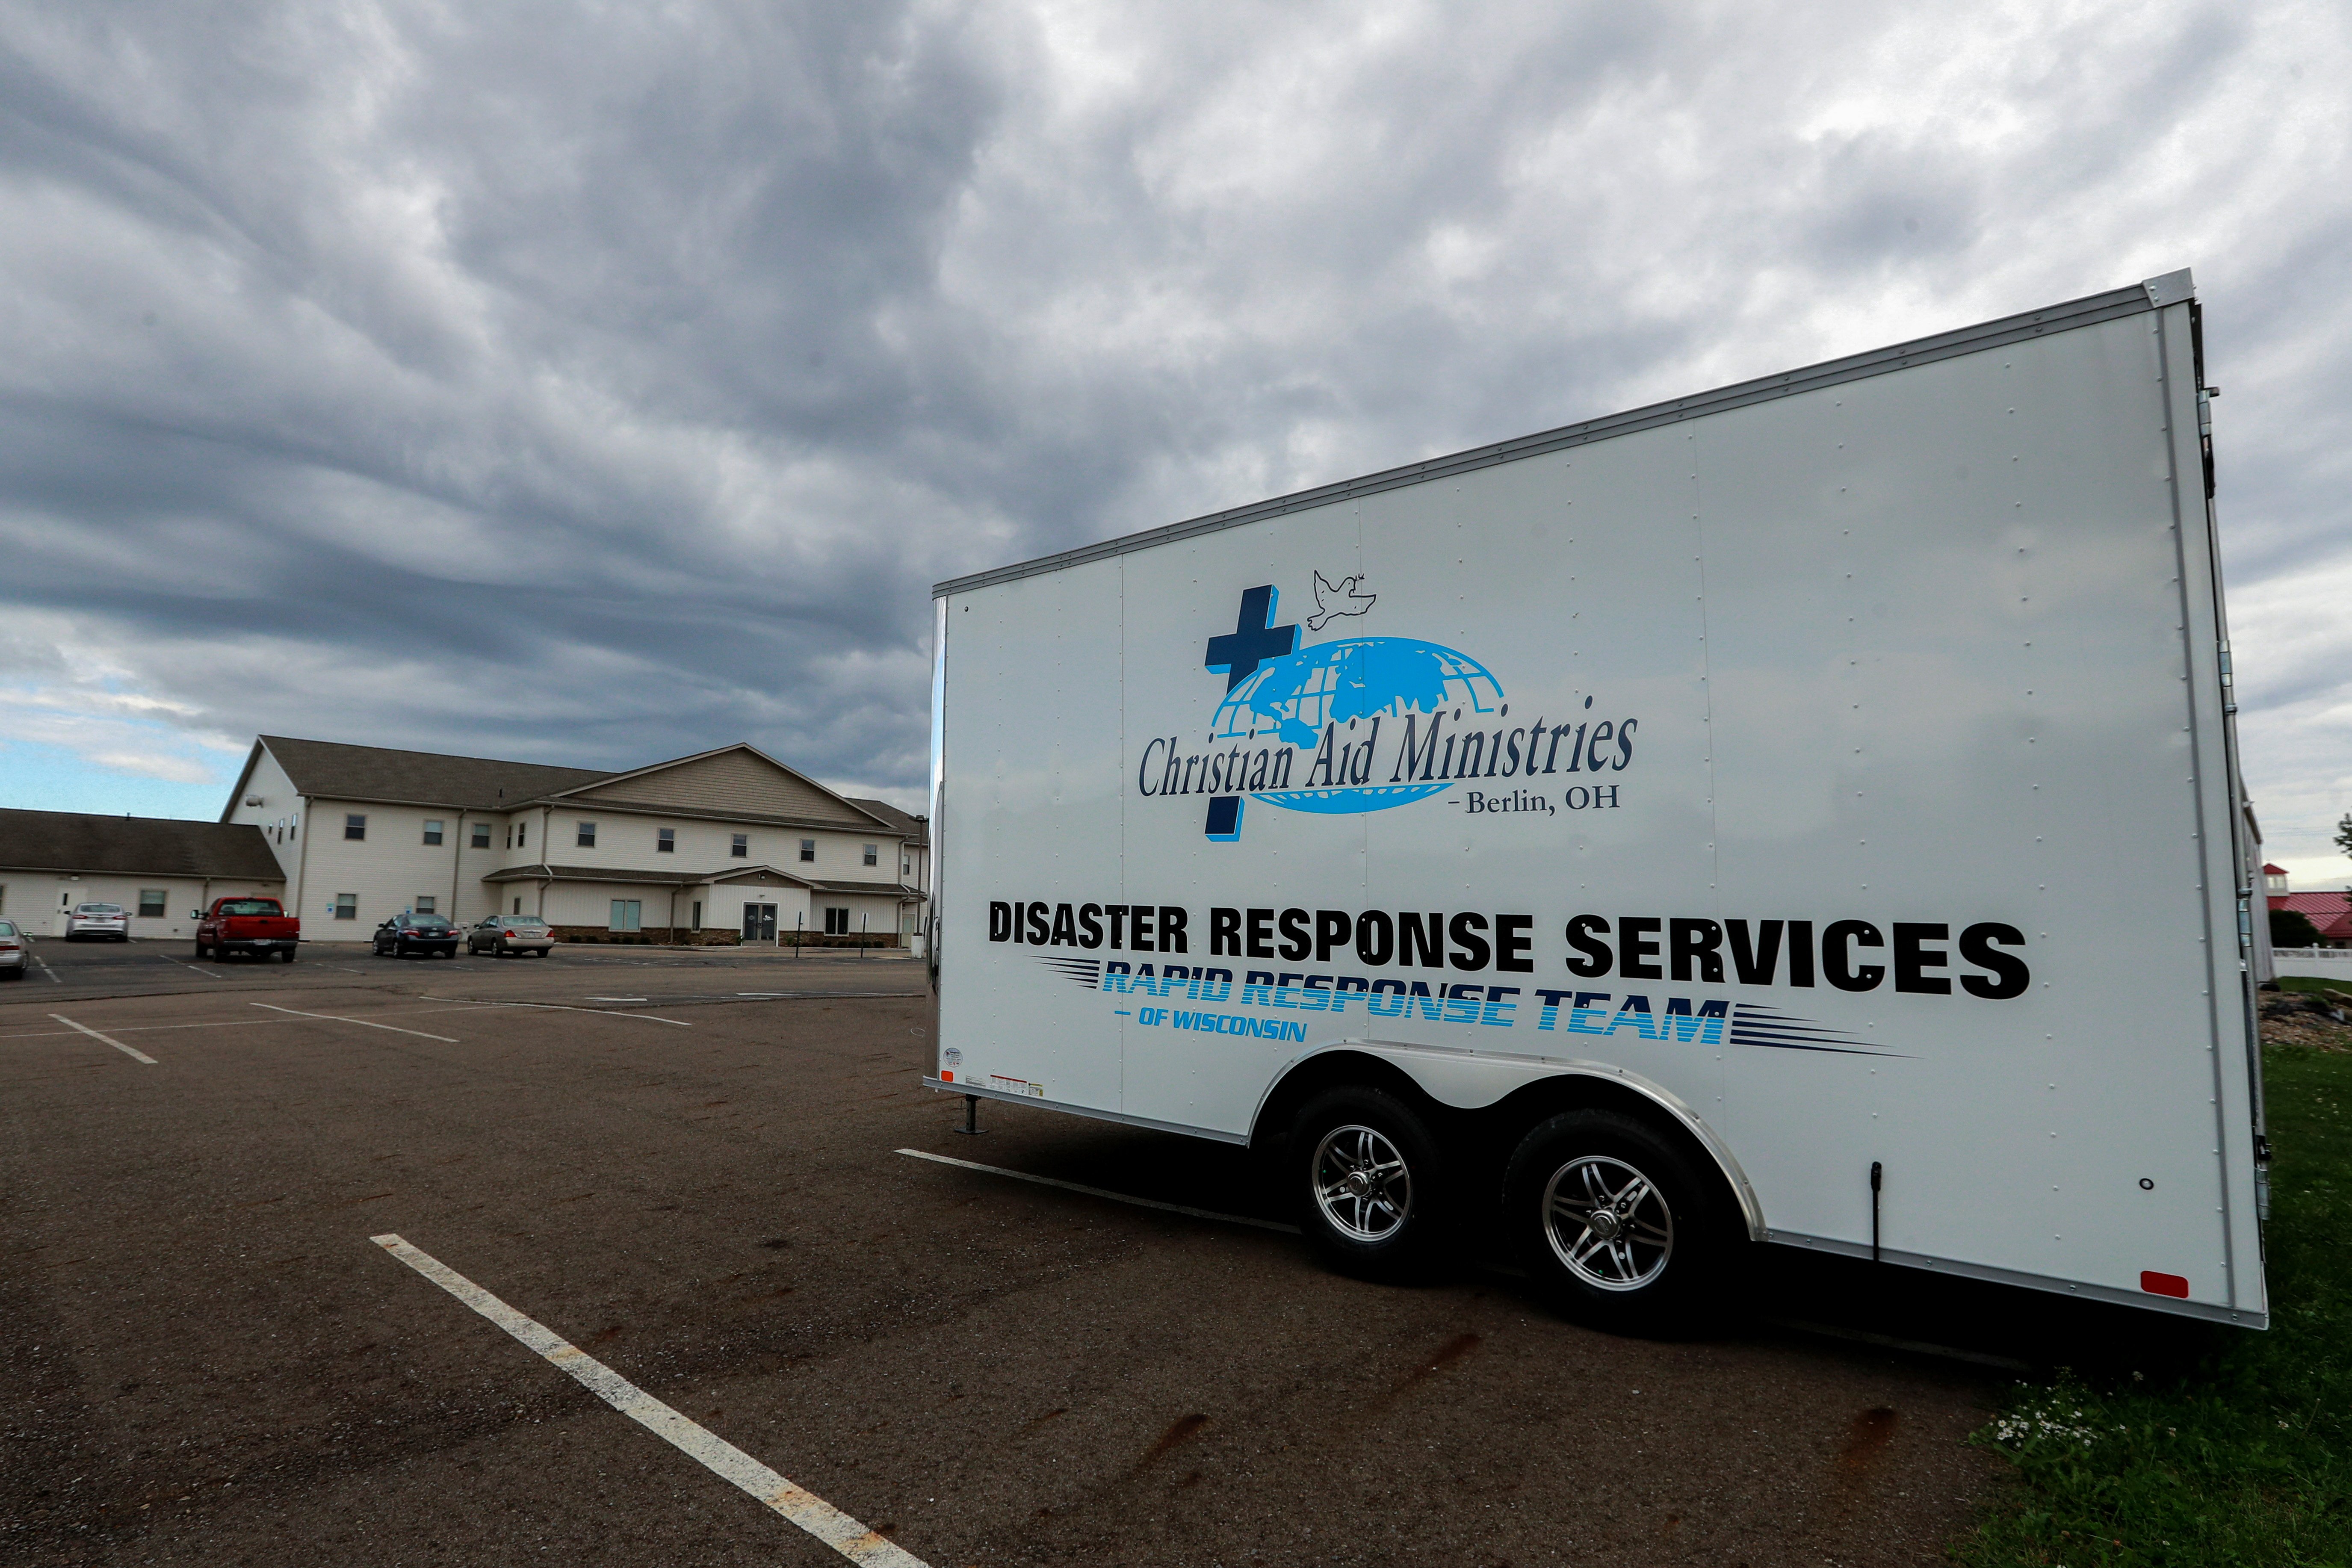 A disaster response trailer sits outside the home office of Christian Aid Ministries in Millersburg, Ohio, Oct. 17, 2021. (CNS photo/Aaron Josefczyk, Reuters)